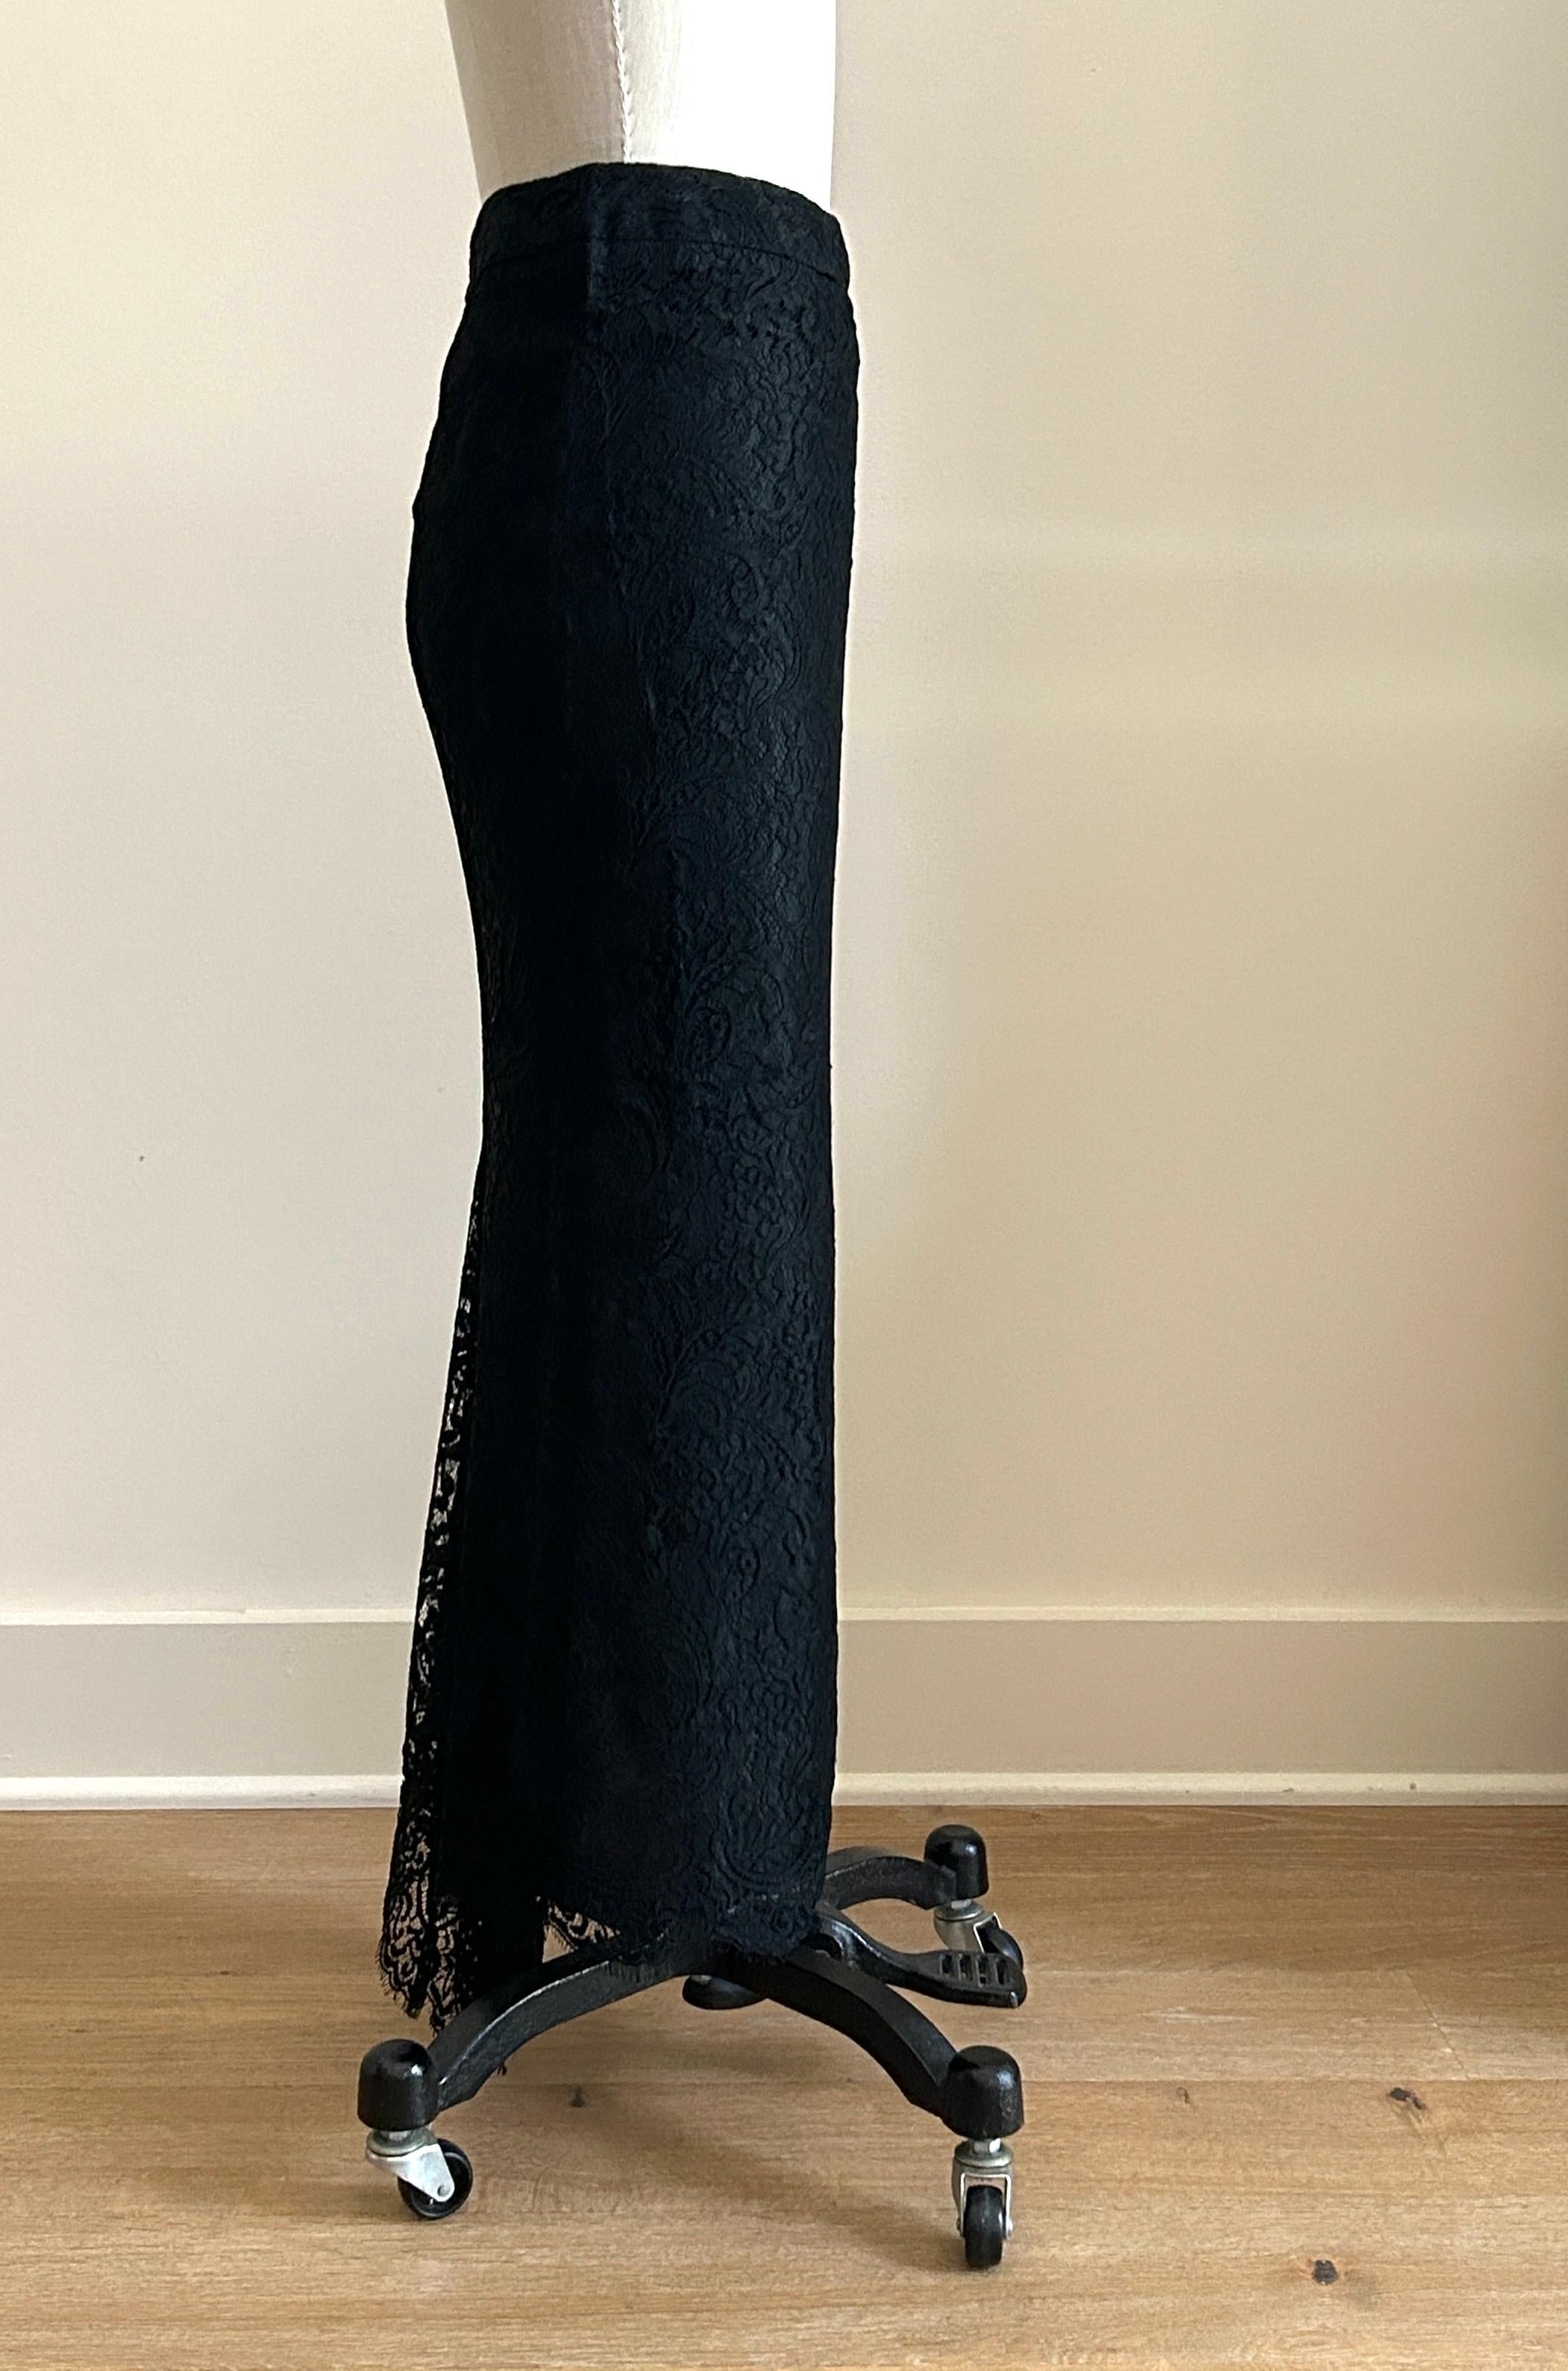 Alexander McQueen Vintage 1990s Black Lace Long Pencil Skirt In Excellent Condition For Sale In San Francisco, CA